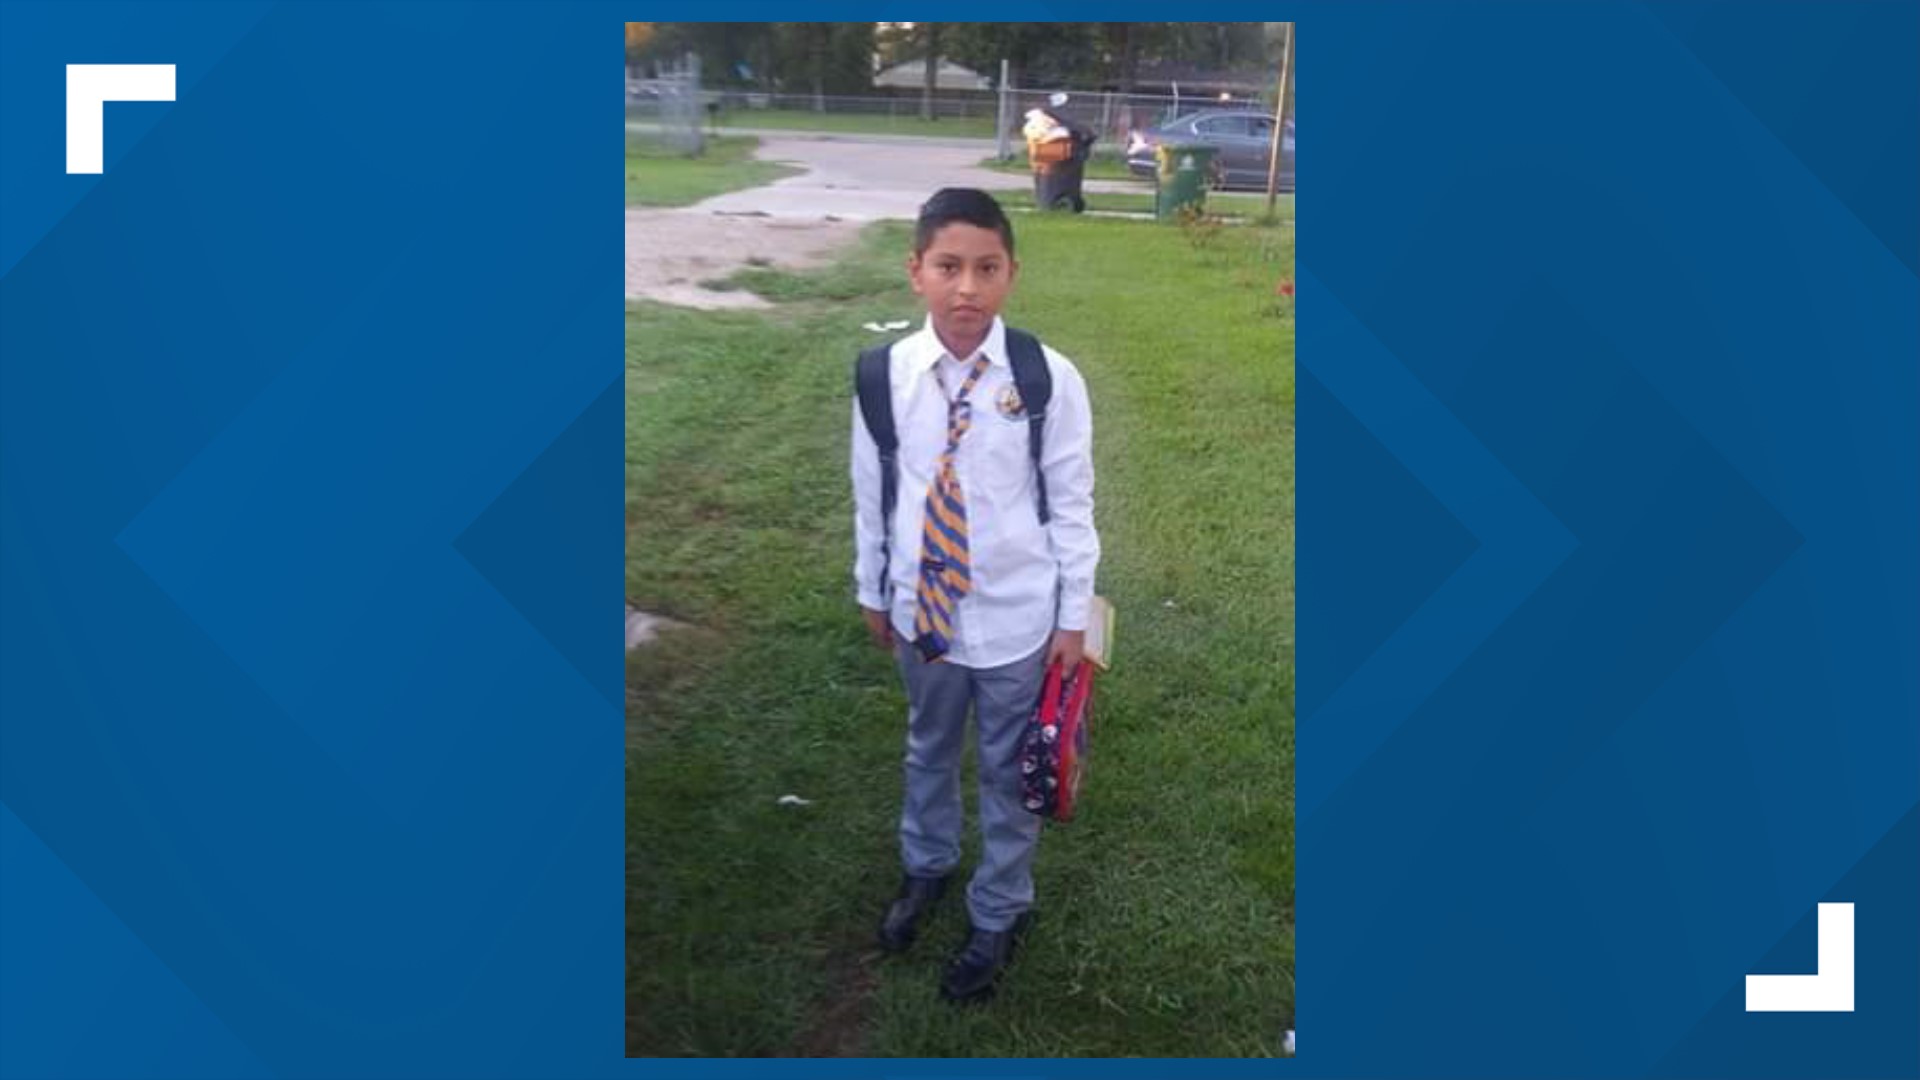 Family members of 10-year-old Alberto Castanon said the boy was killed in the crash. His grandmother, Margarita Flores, was injured.